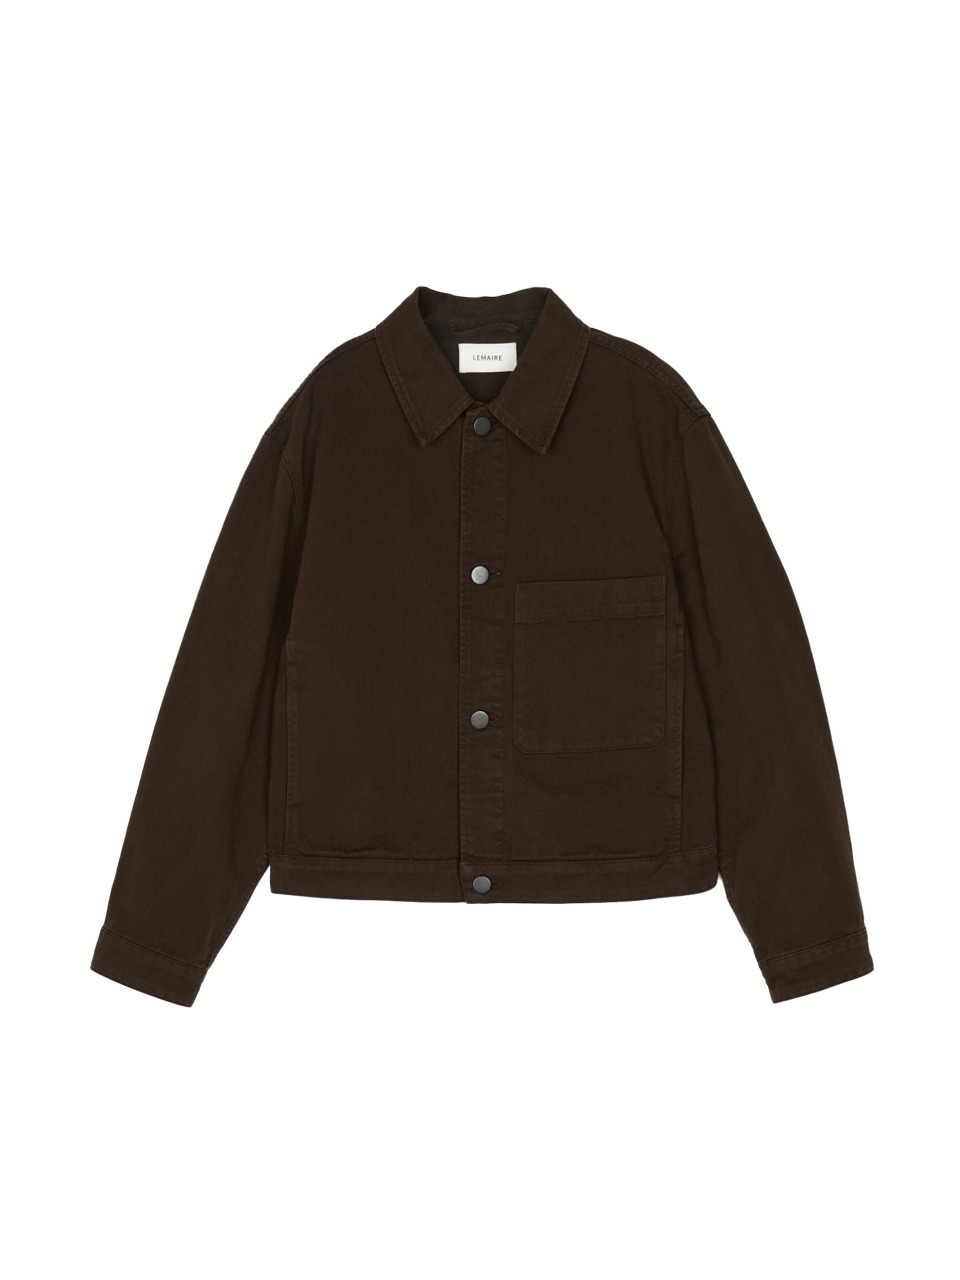 LEMAIRE - BOXY TRUCKER JACKET (BROWN)